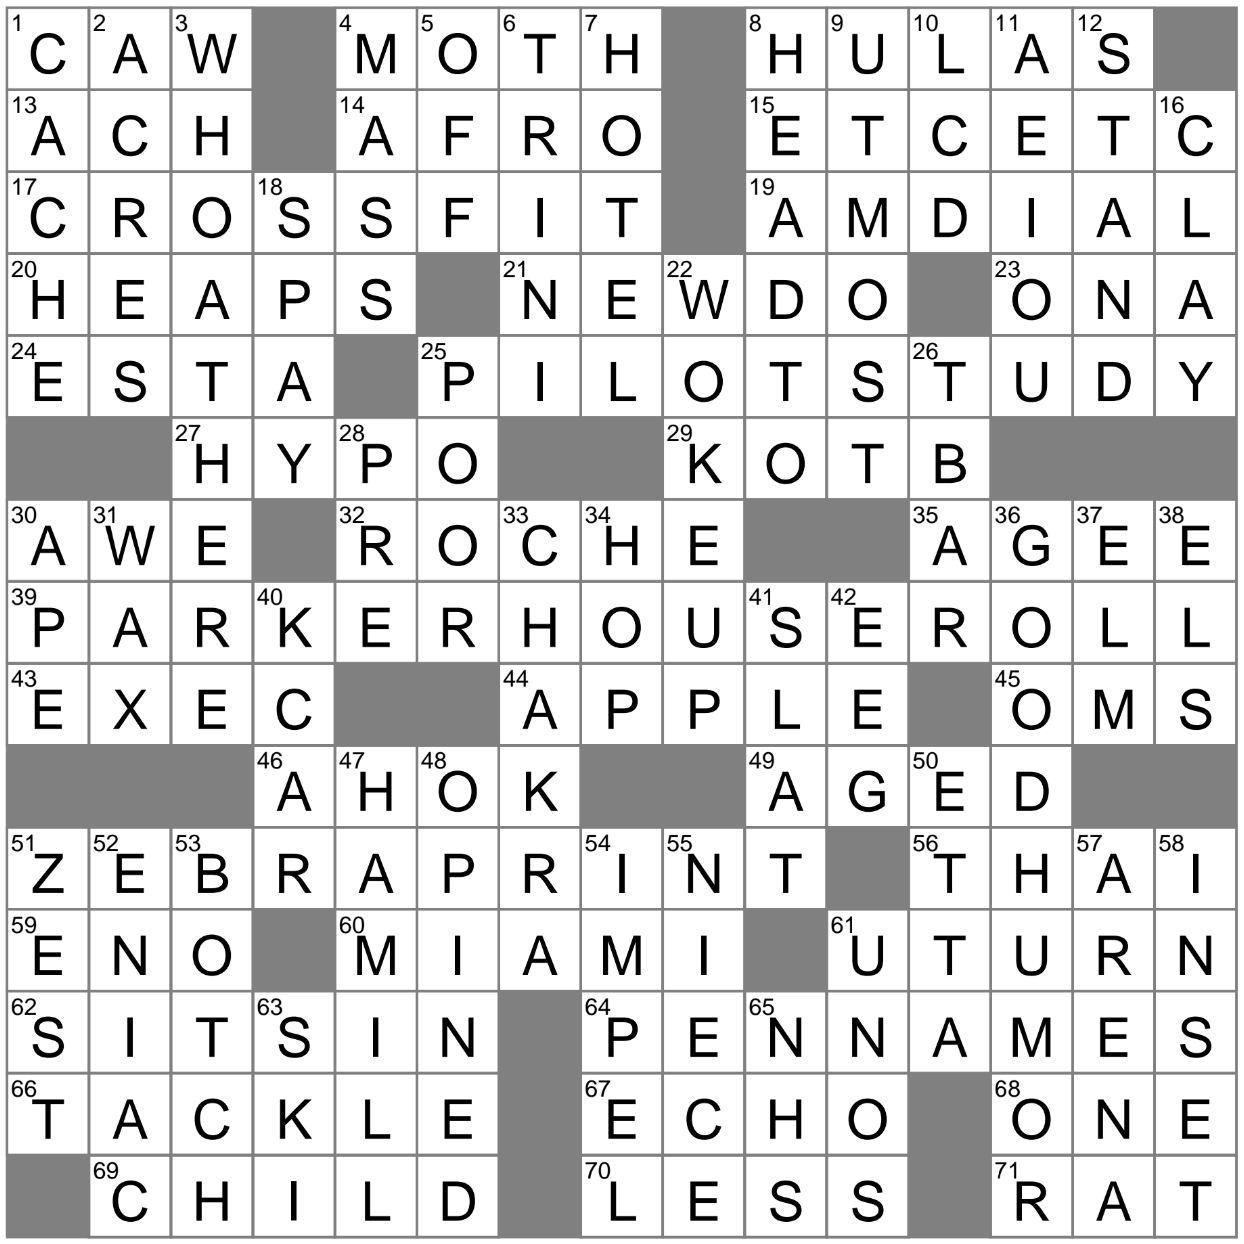 saw this when i went to do the crossword this morning : r/melbourne